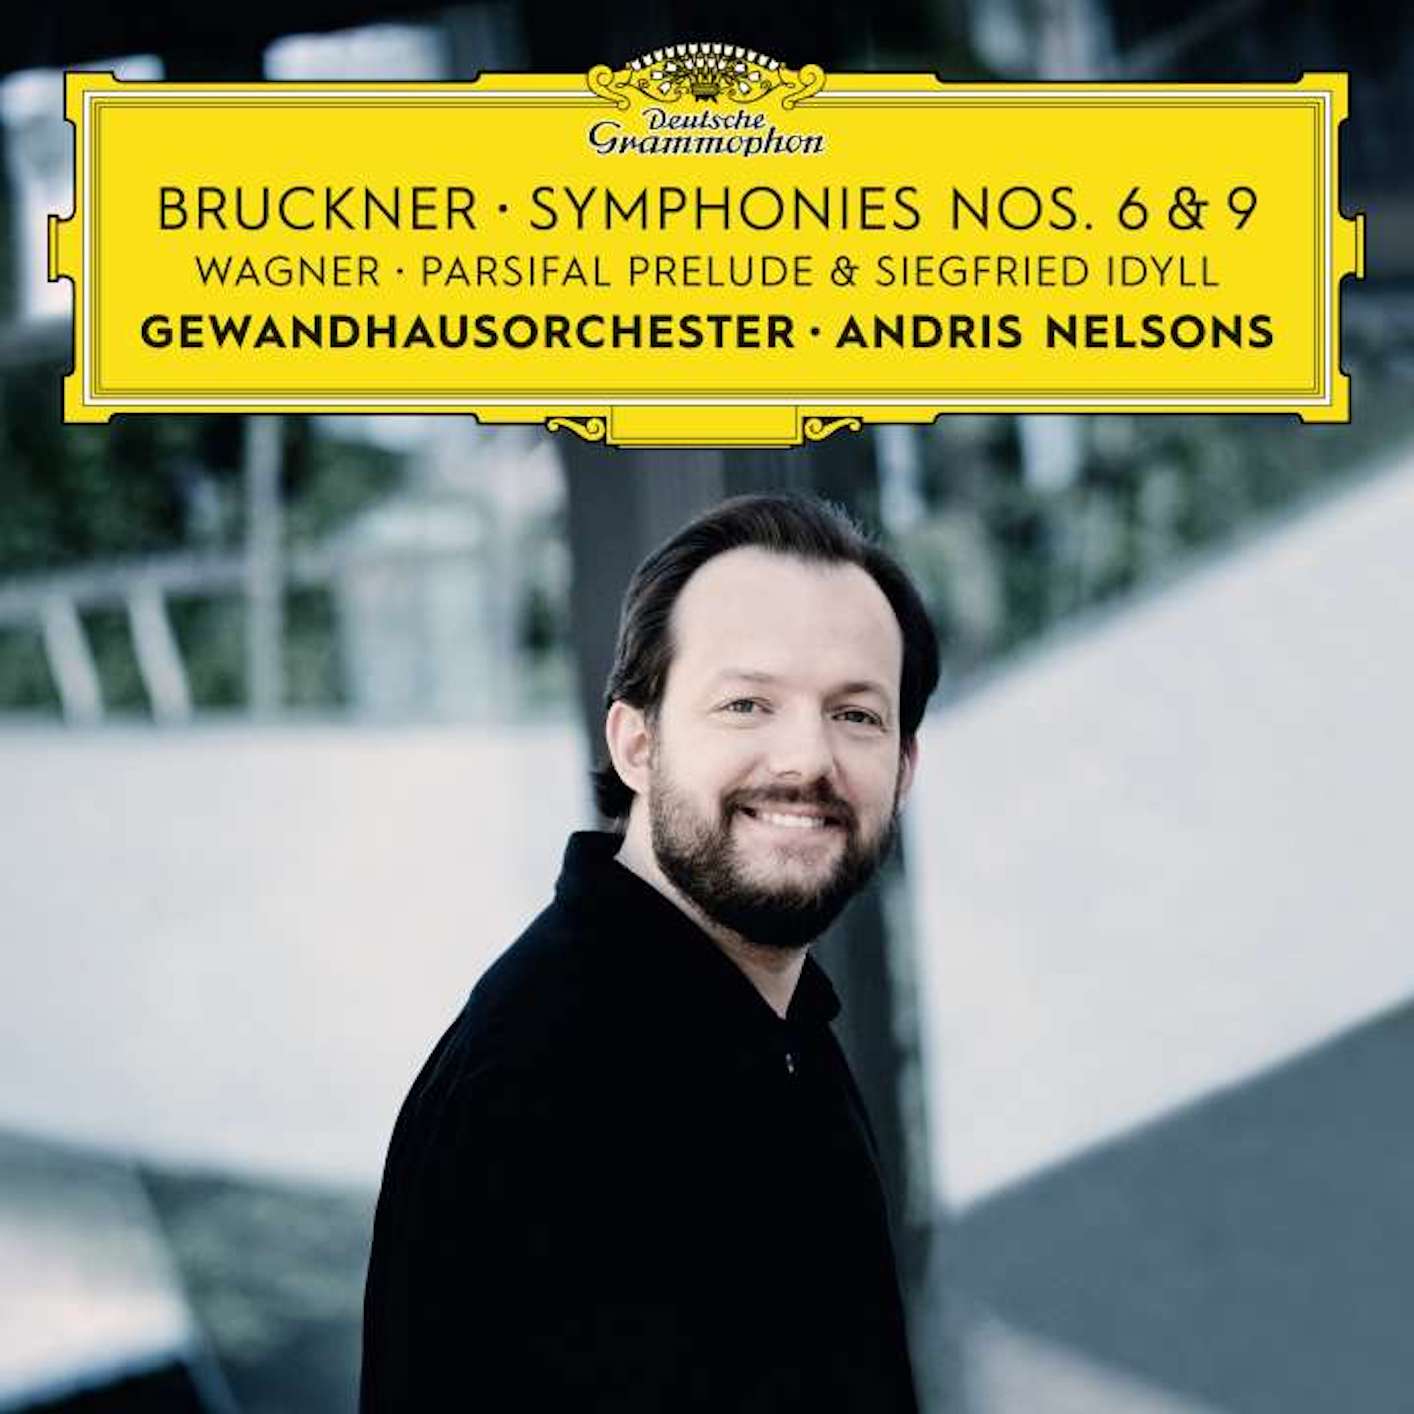 Andris Nelsons – Bruckner: Symphonies Nos. 6 & 9 – Wagner: Siegfried Idyll / Parsifal Prelude (2019) [FLAC 24bit/192kHz]